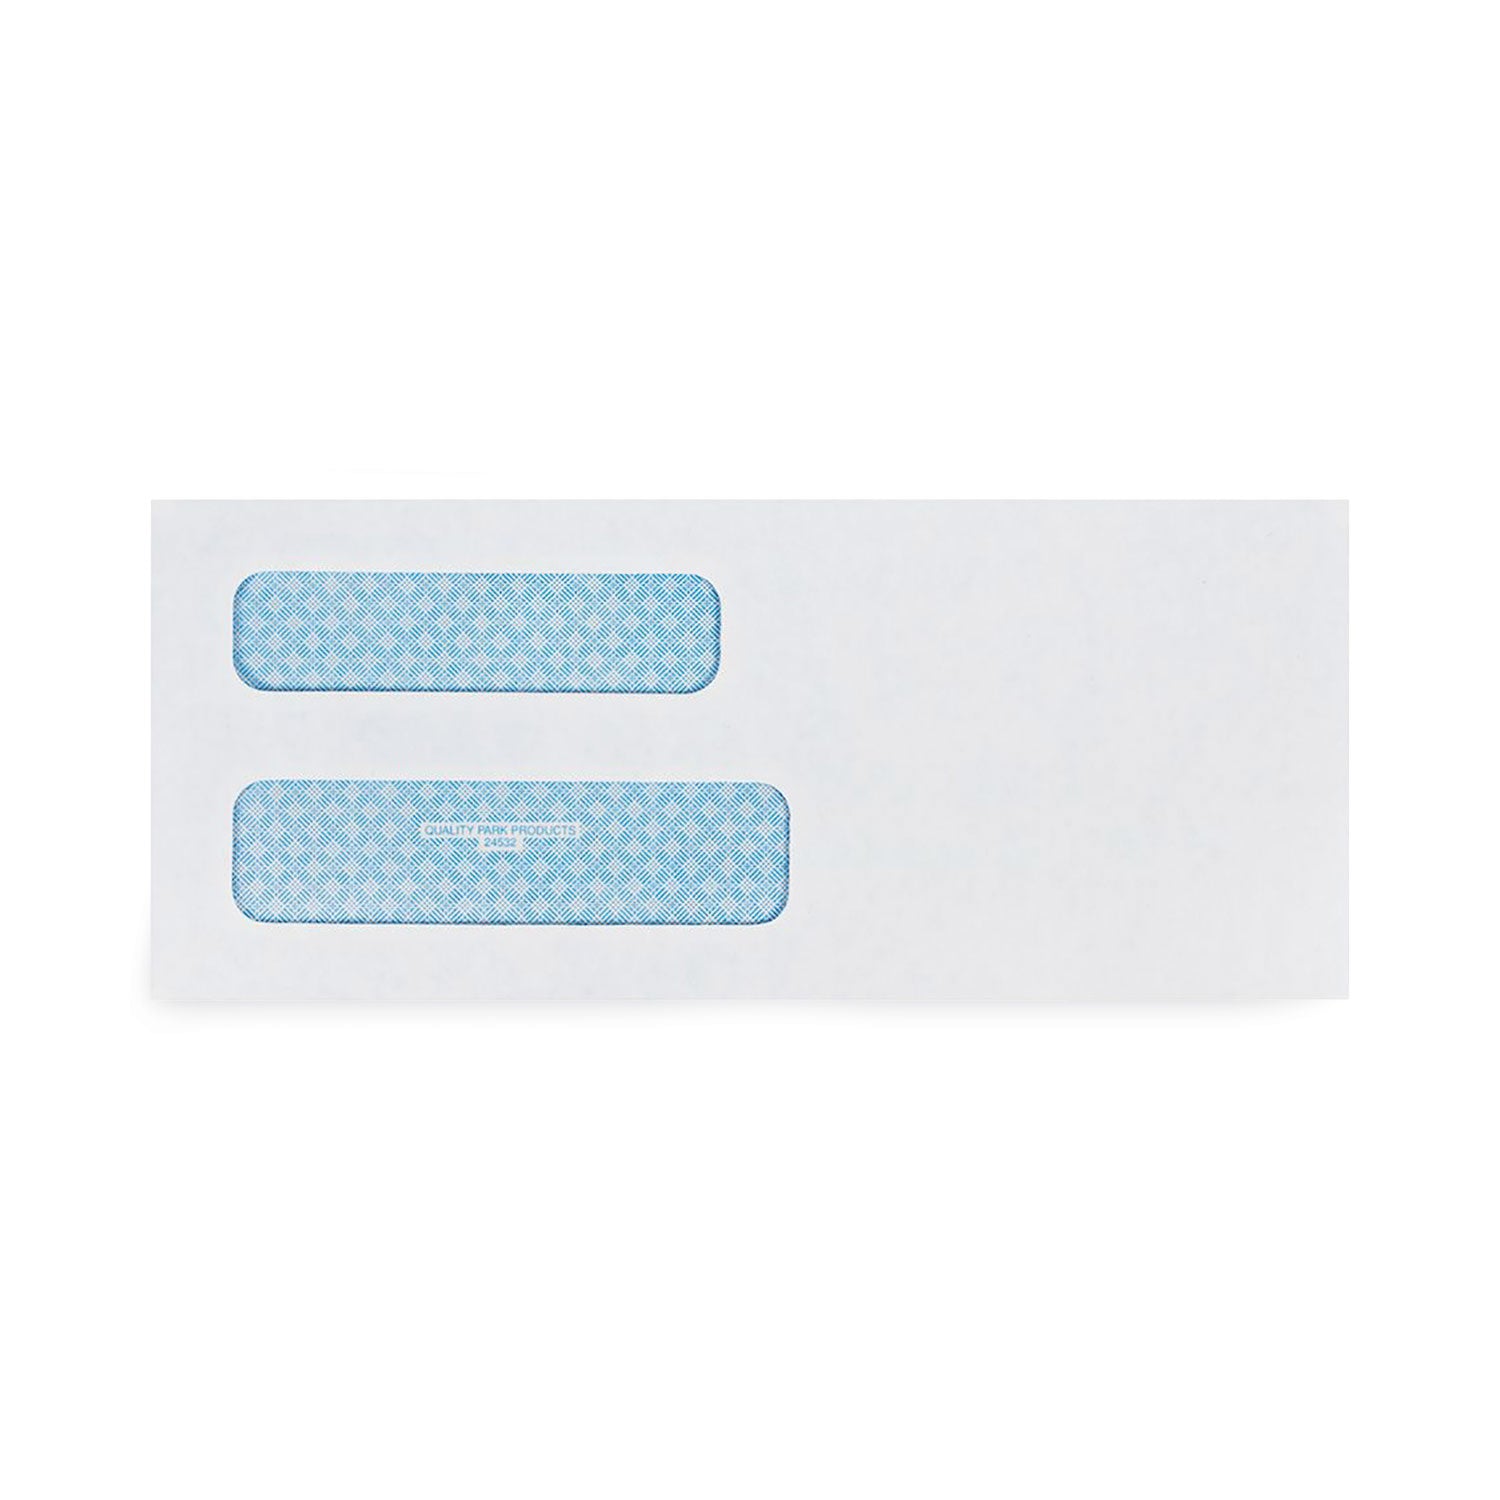 Double Window Security-Tinted Check Envelope, #8 5/8, Commercial Flap, Gummed Closure, 3.63 x 8.63, White, 1,000/Box - 